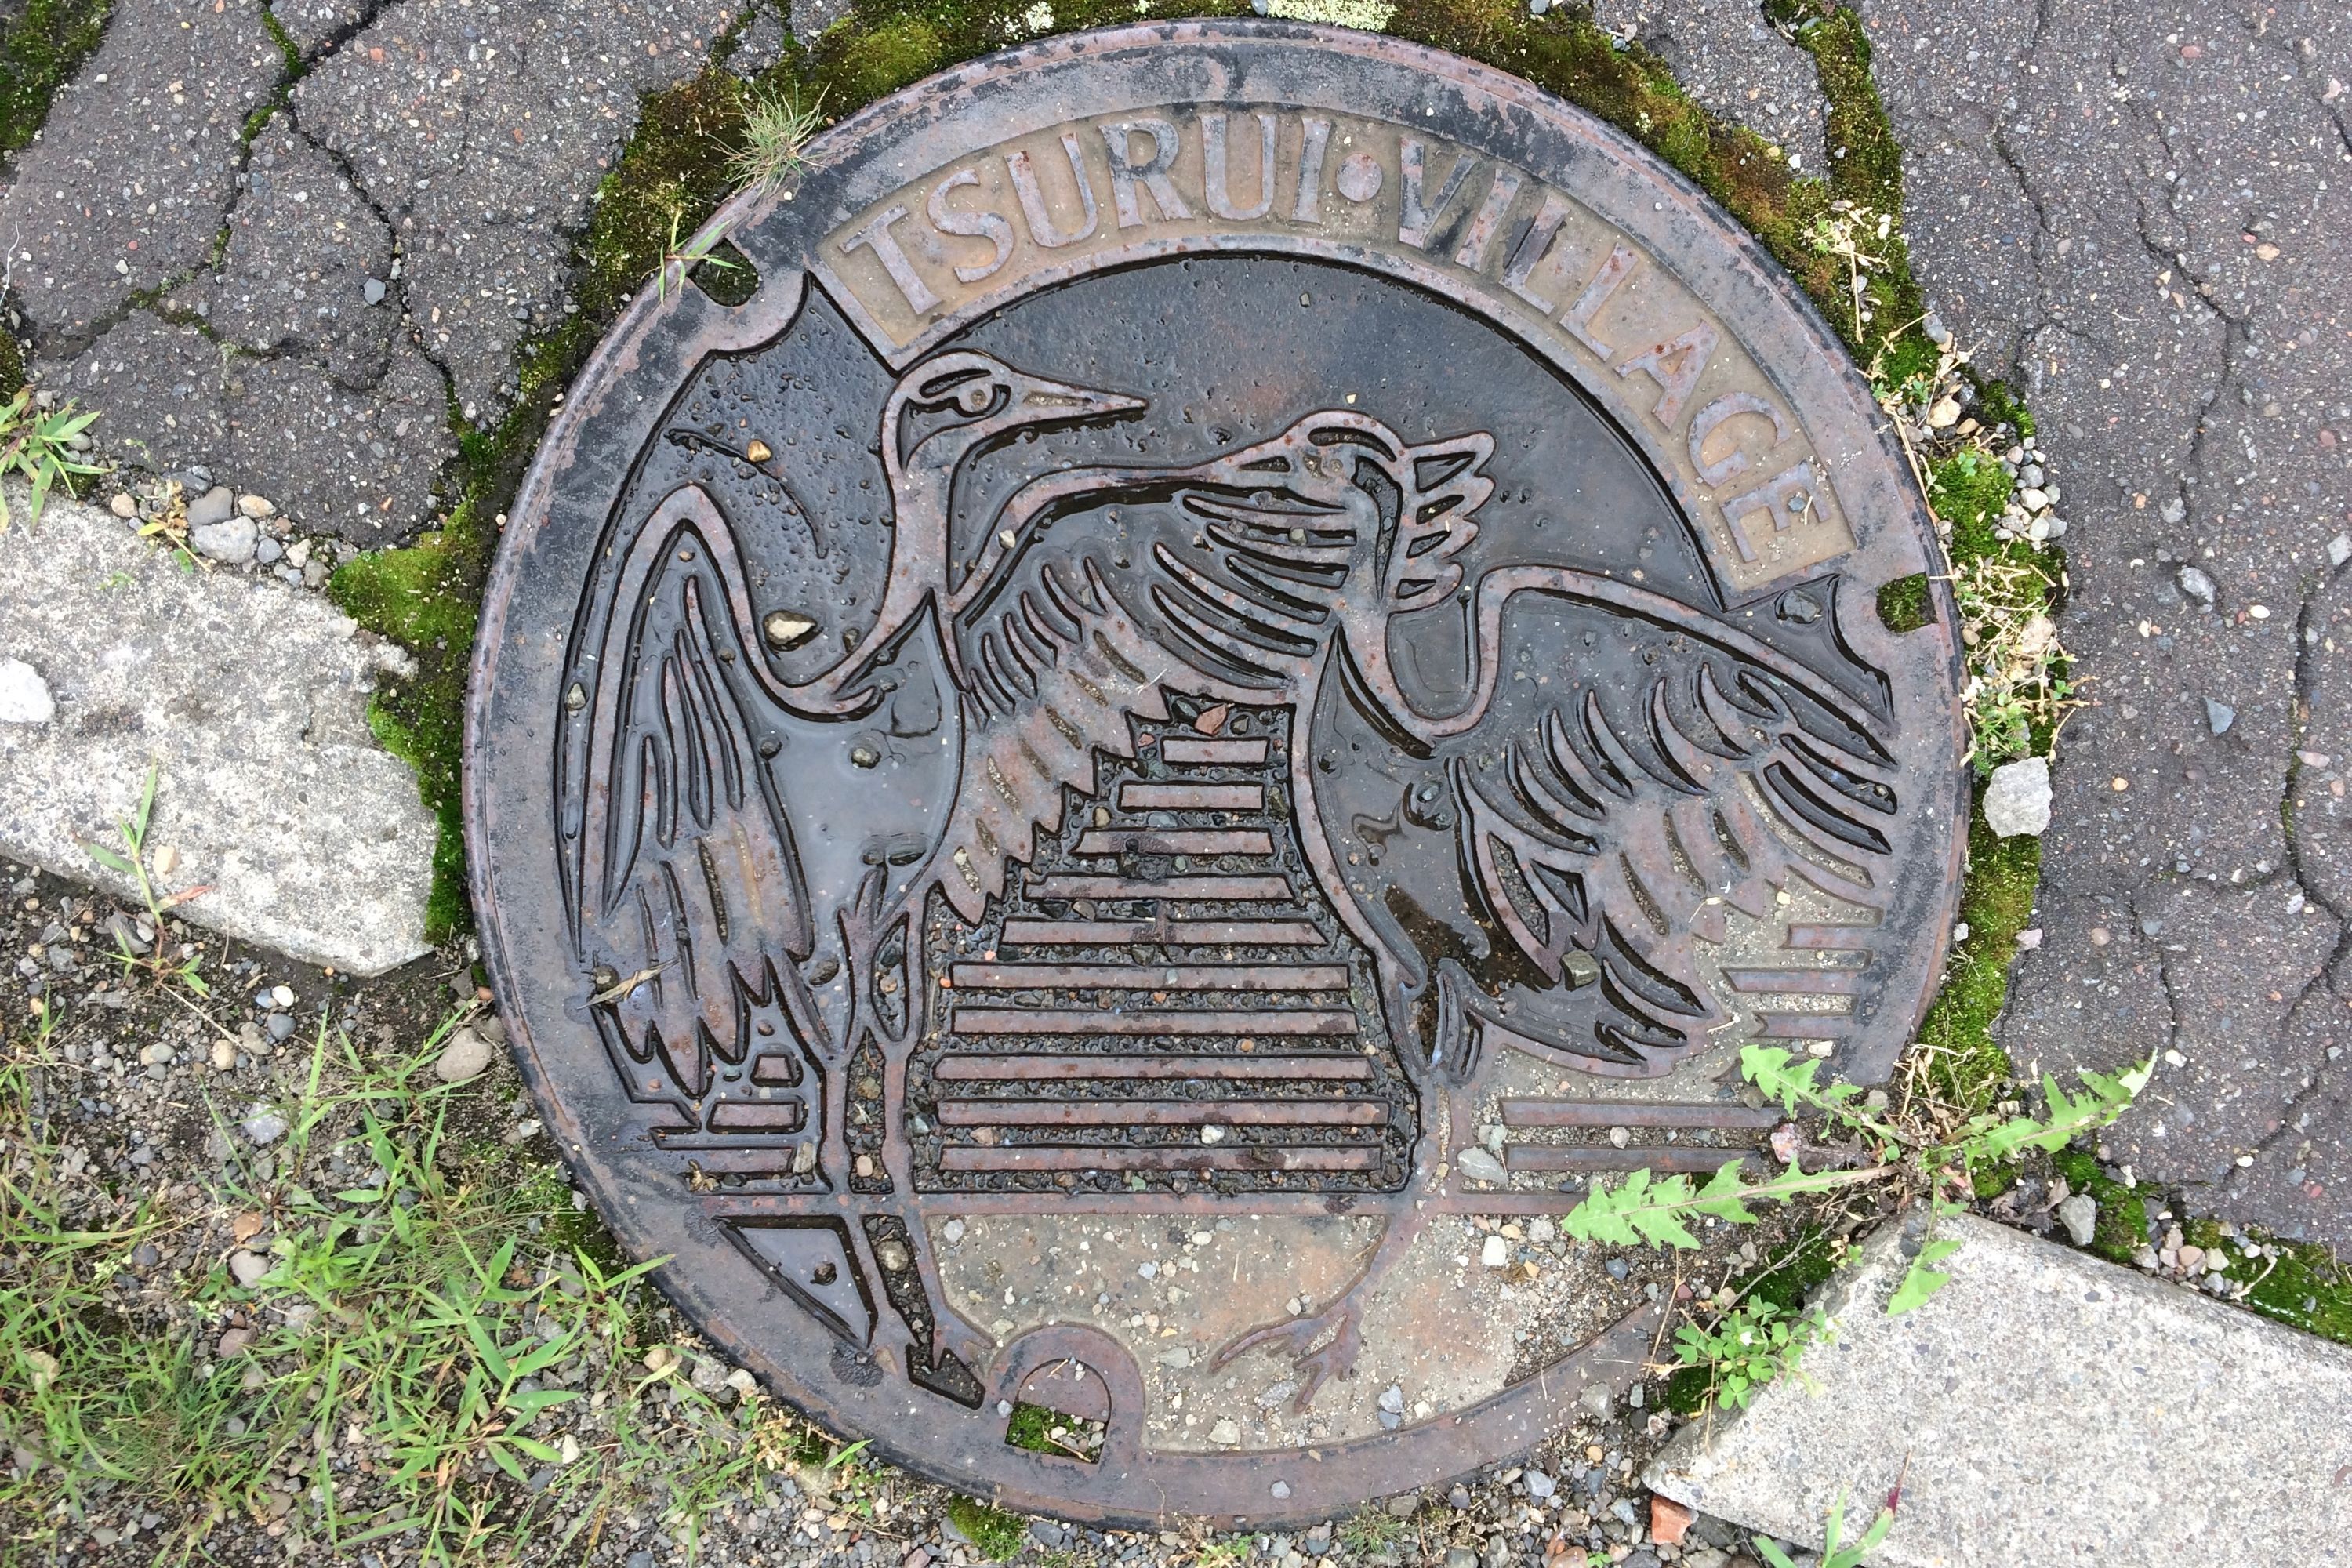 A manhole cover from Tsurui shows two red-crowned cranes dancing.